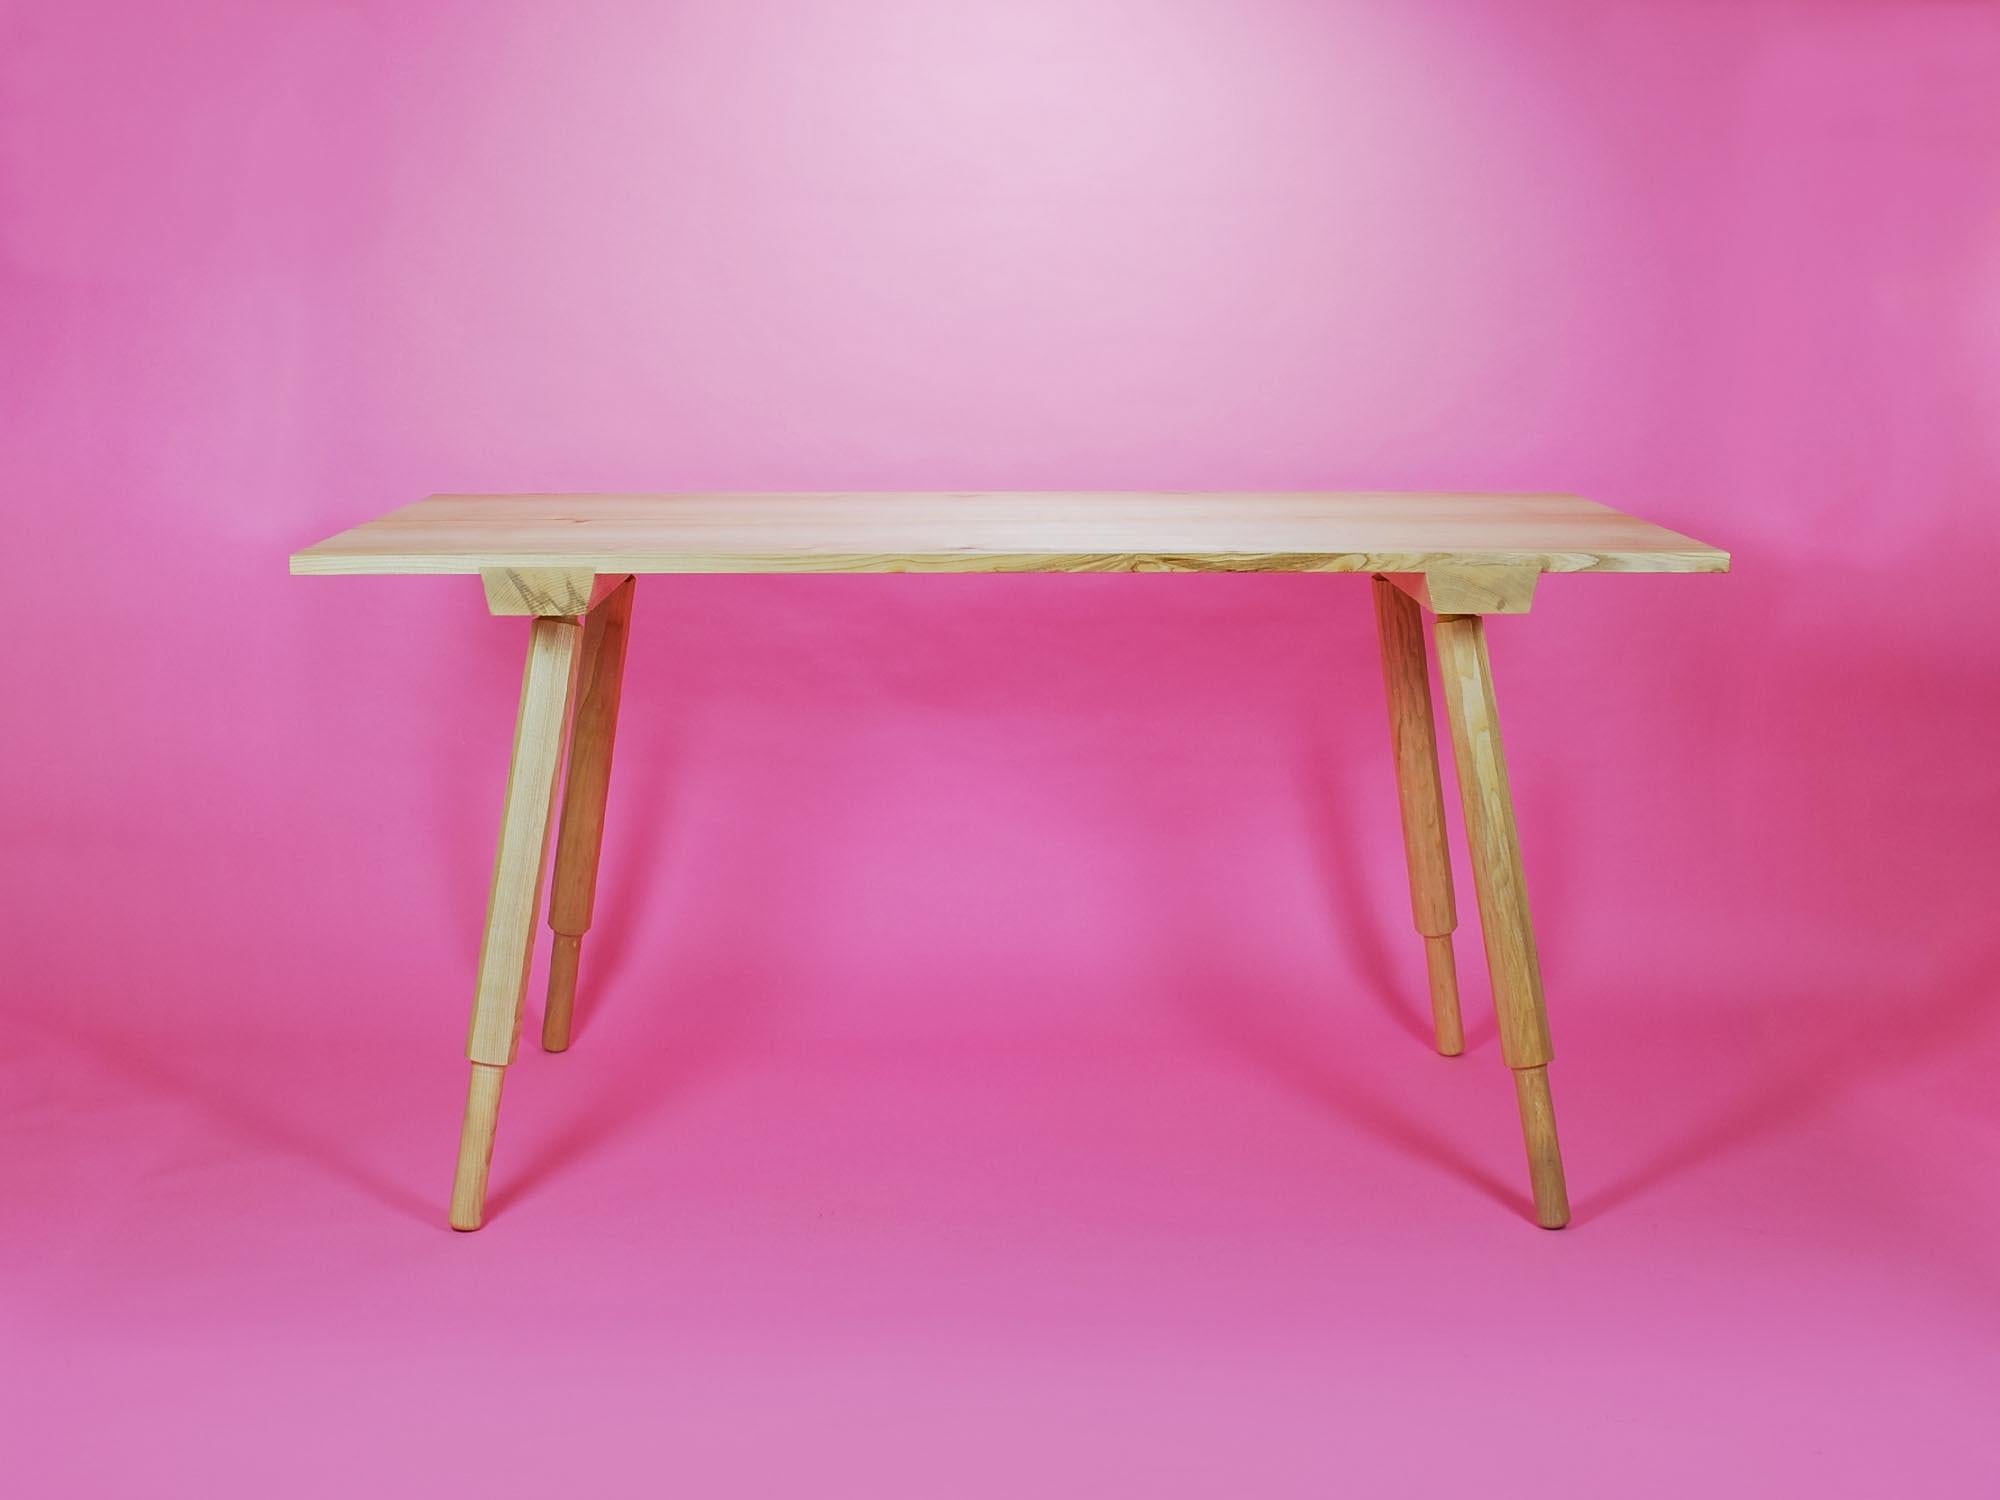 Solid Ash Dining Table with hand turned, screw in legs for easy assembly.

The table is constructed in beautiful English Ash. The legs are designed with a unique octagonal shape with smooth round feet at the bottom.

The legs screw into sturdy